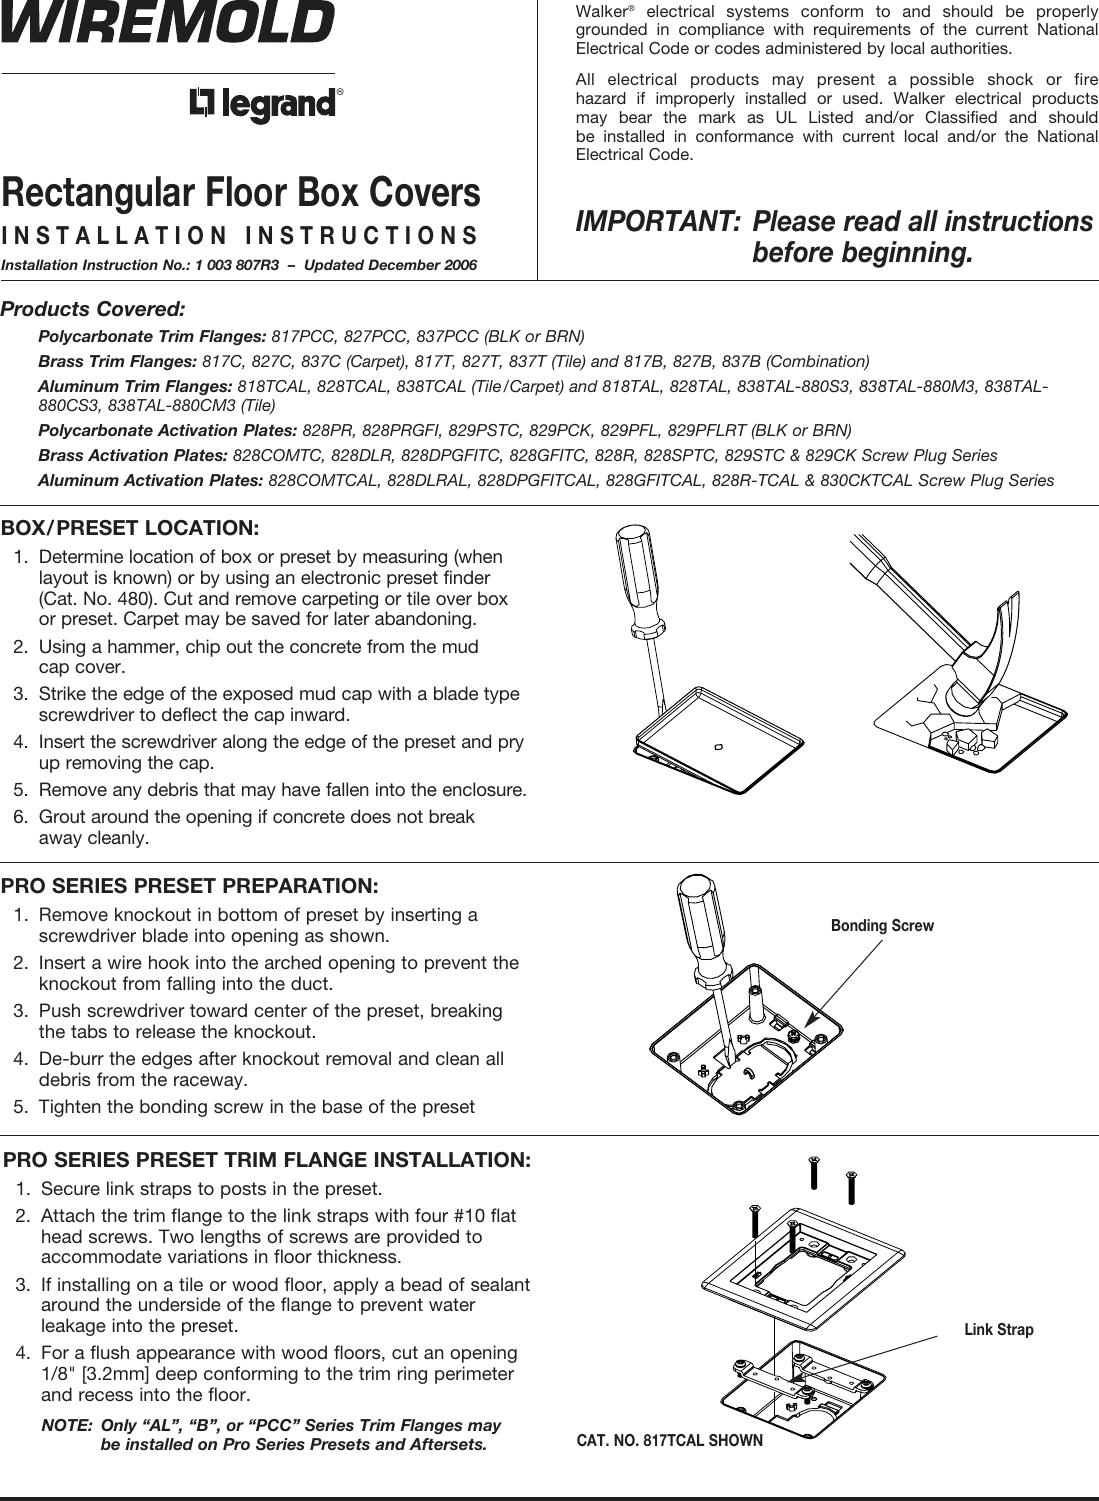 Page 1 of 4 - Rectangular Floor Box Covers Installation Instructions  Directions